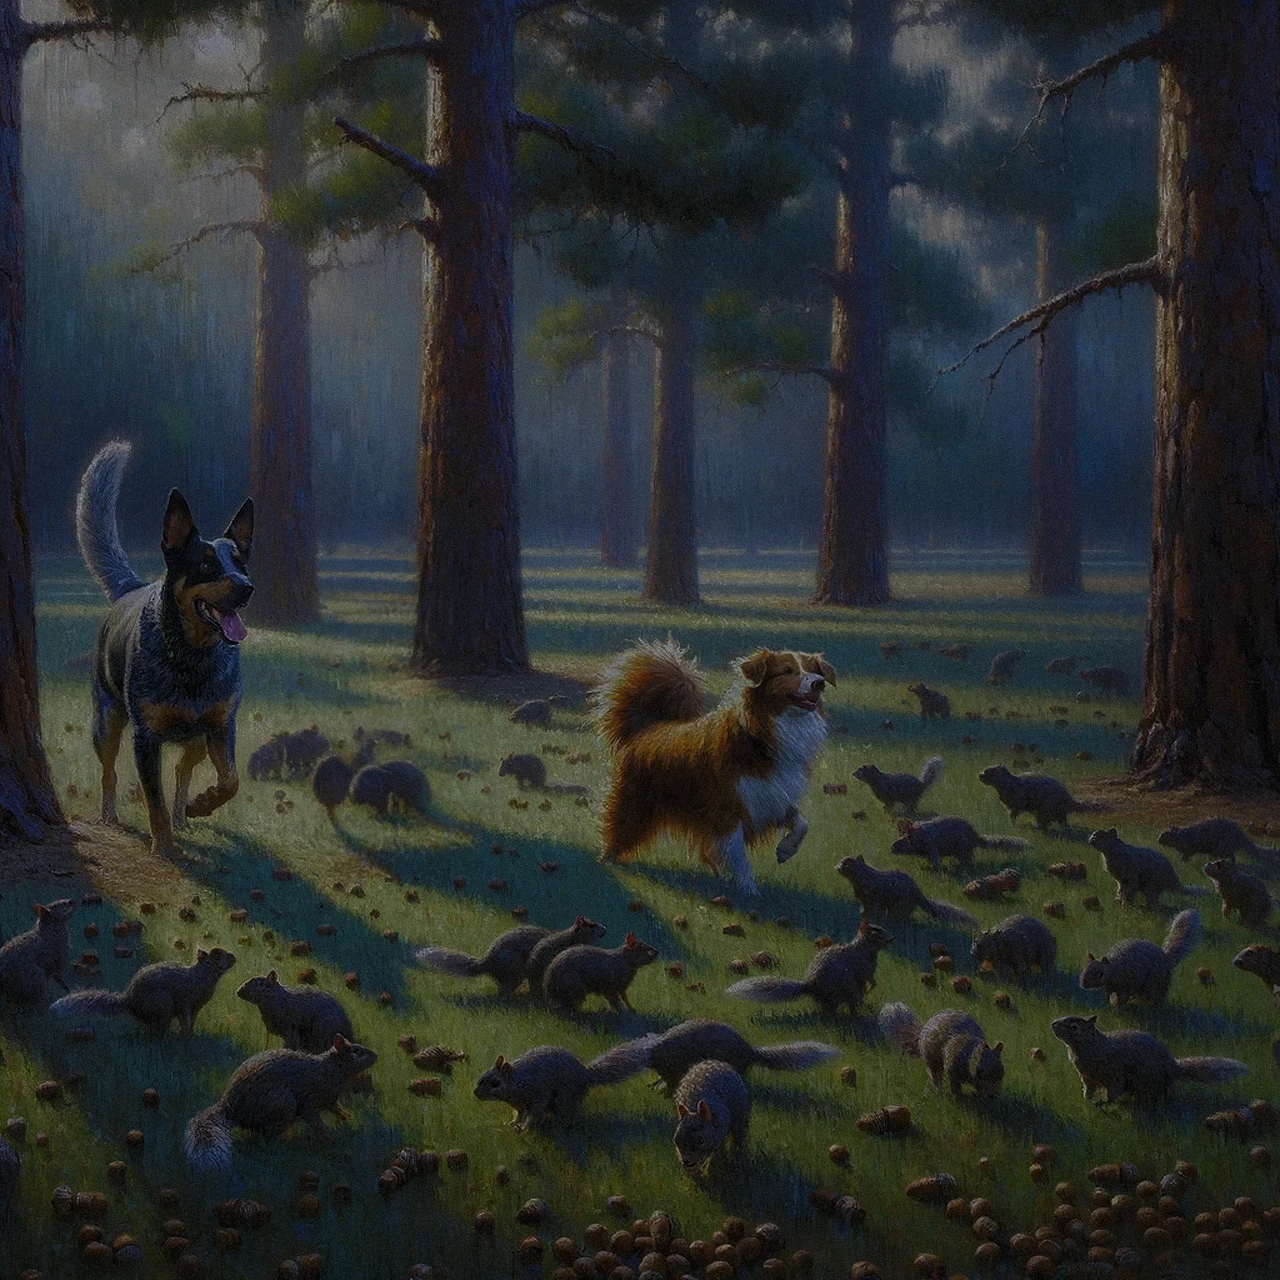 An impressionist style painting of two exploring dogs surrounded by pine trees, squirrels, and acorns